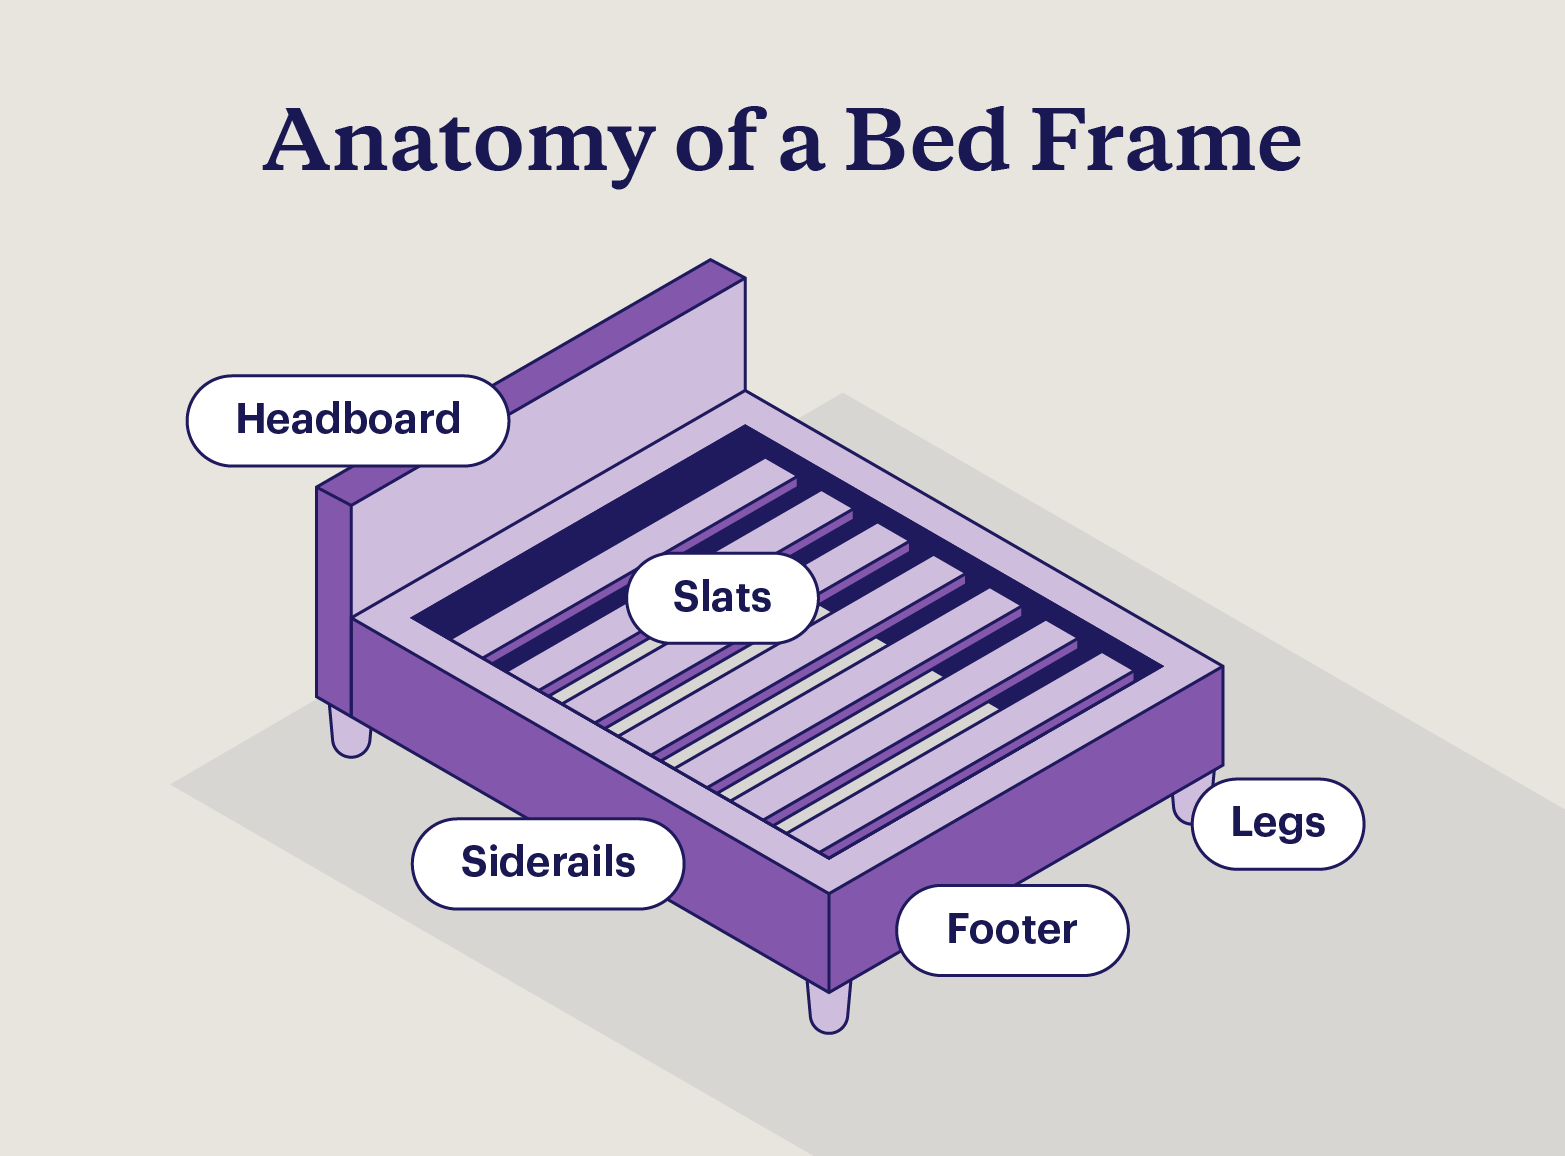 An illustrated diagram shows all the components of a bed frame, including slats, side rails, headboard, footer, and legs.